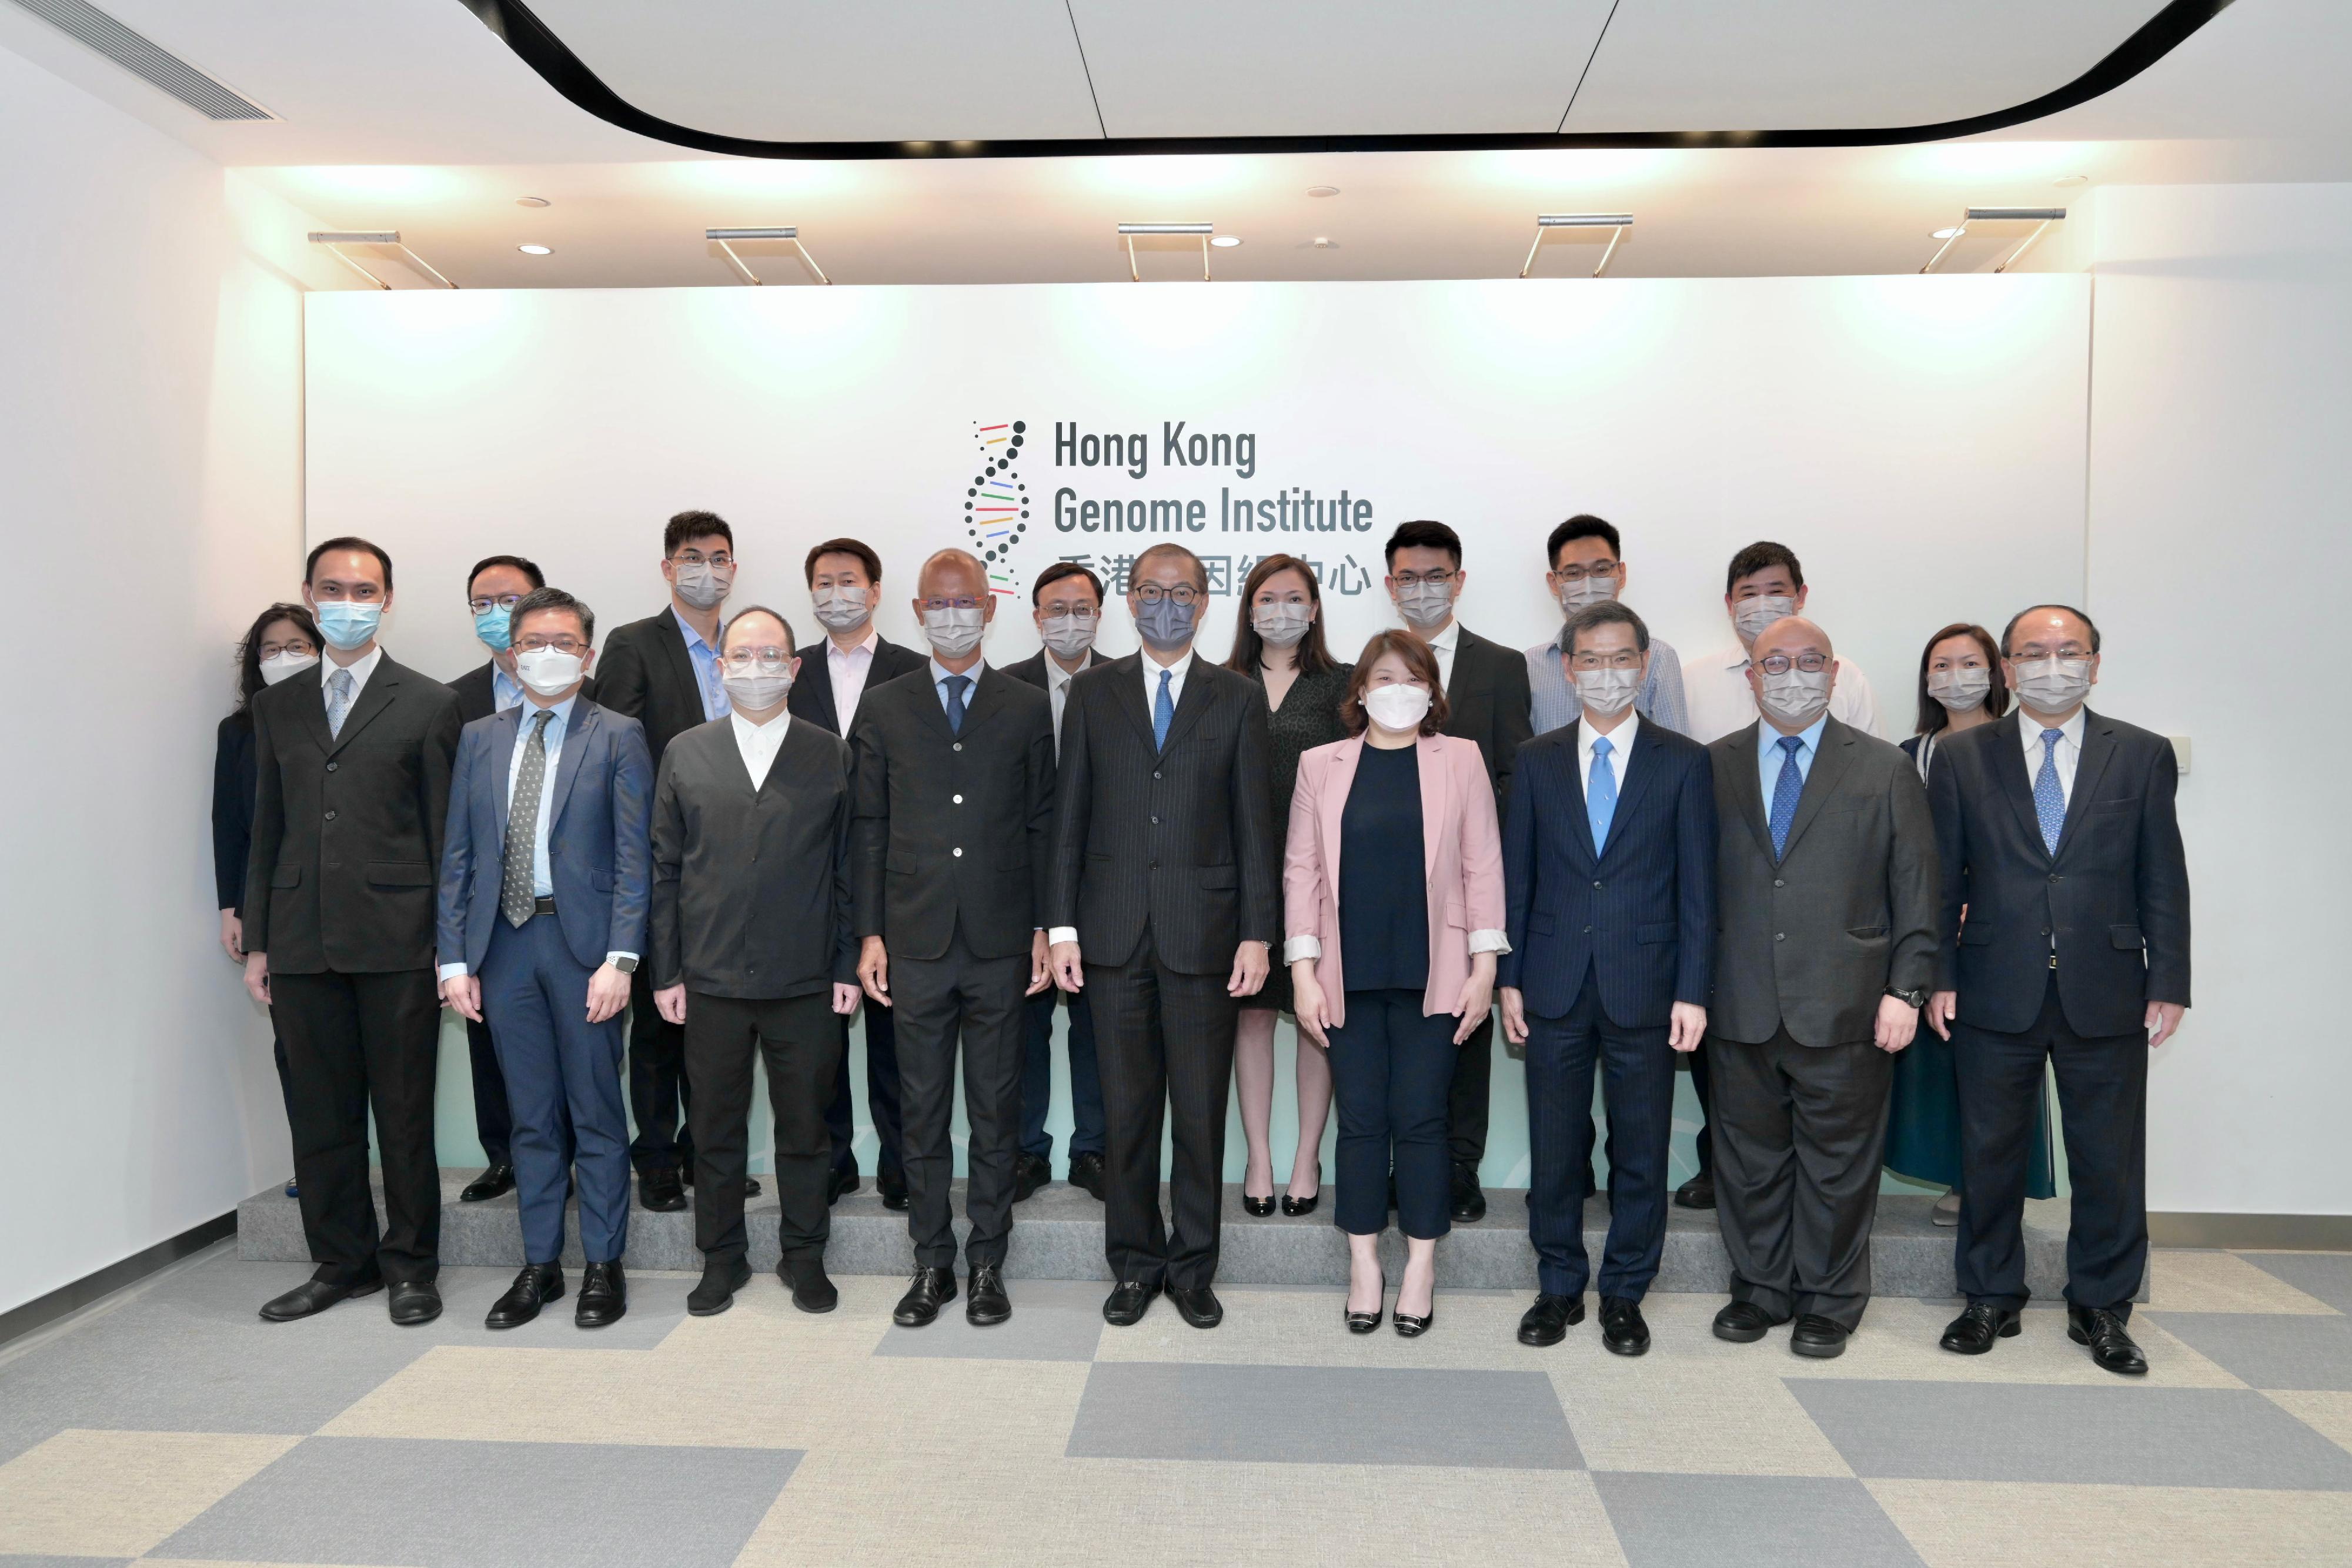 The Secretary for Health, Professor Lo Chung-mau, and the Under Secretary for Health, Dr Libby Lee, visited the Hong Kong Genome Institute (HKGI) today (August 9). Photo shows Professor Lo (front row, centre), and Dr Lee (front row, fourth right), pictured with the Chairperson of the HKGI, Mr Philip Tsai (front row, fourth left); the Deputy Chairperson of the HKGI, Professor Raymond Liang (front row, third left); the Chief Executive Officer of the HKGI, Dr Lo Su-vui (front row, third right); and HKGI Board members and staff.